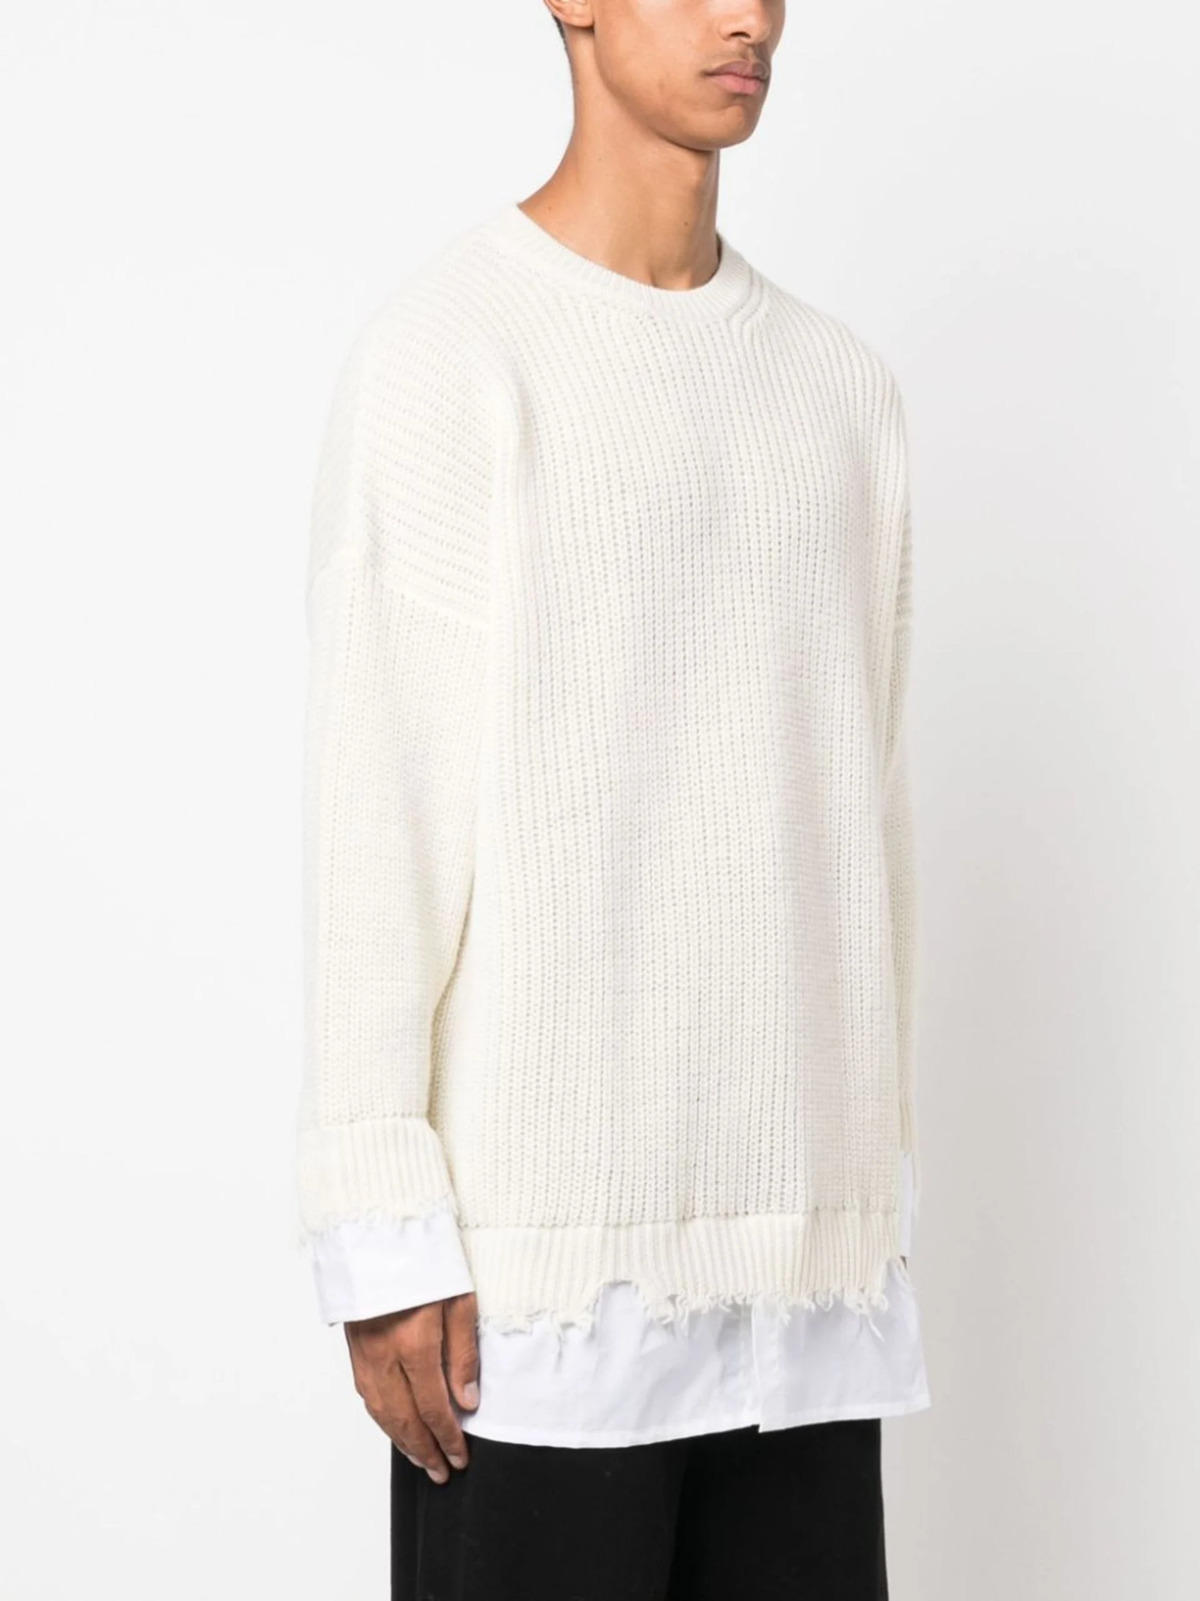 PAUSE or Skip: MM6 Maison Margiela Neutral Layered Sweater – PAUSE